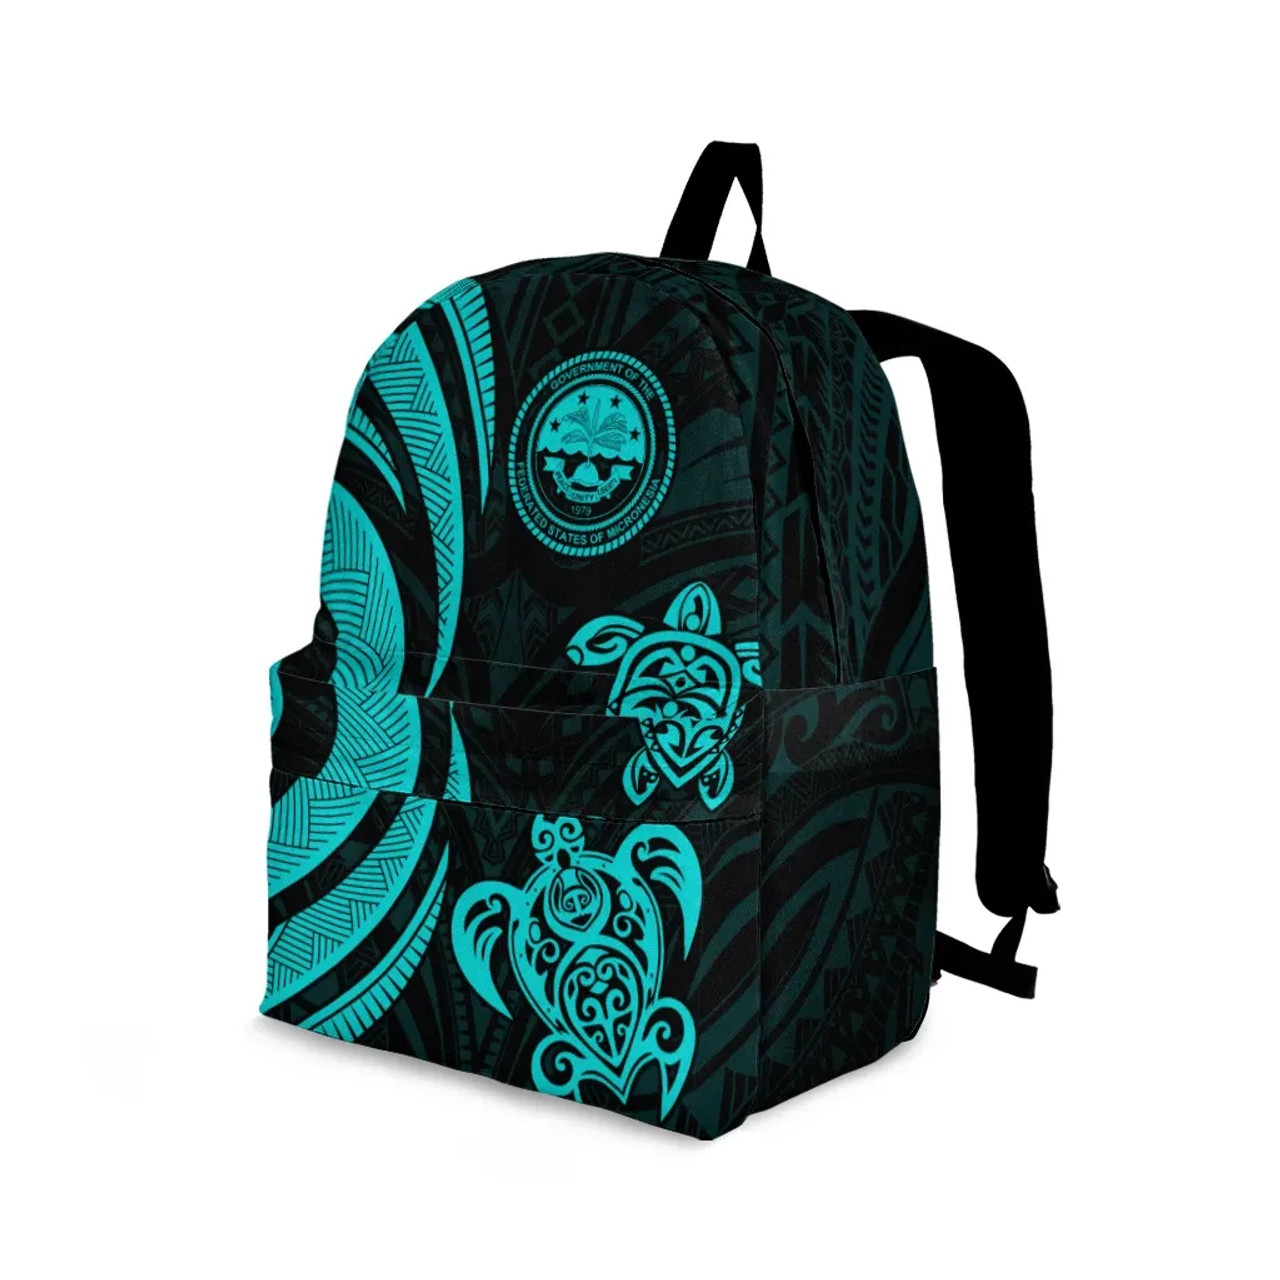 Federated States of Micronesia Backpack - Turquoise Tentacle Turtle 3